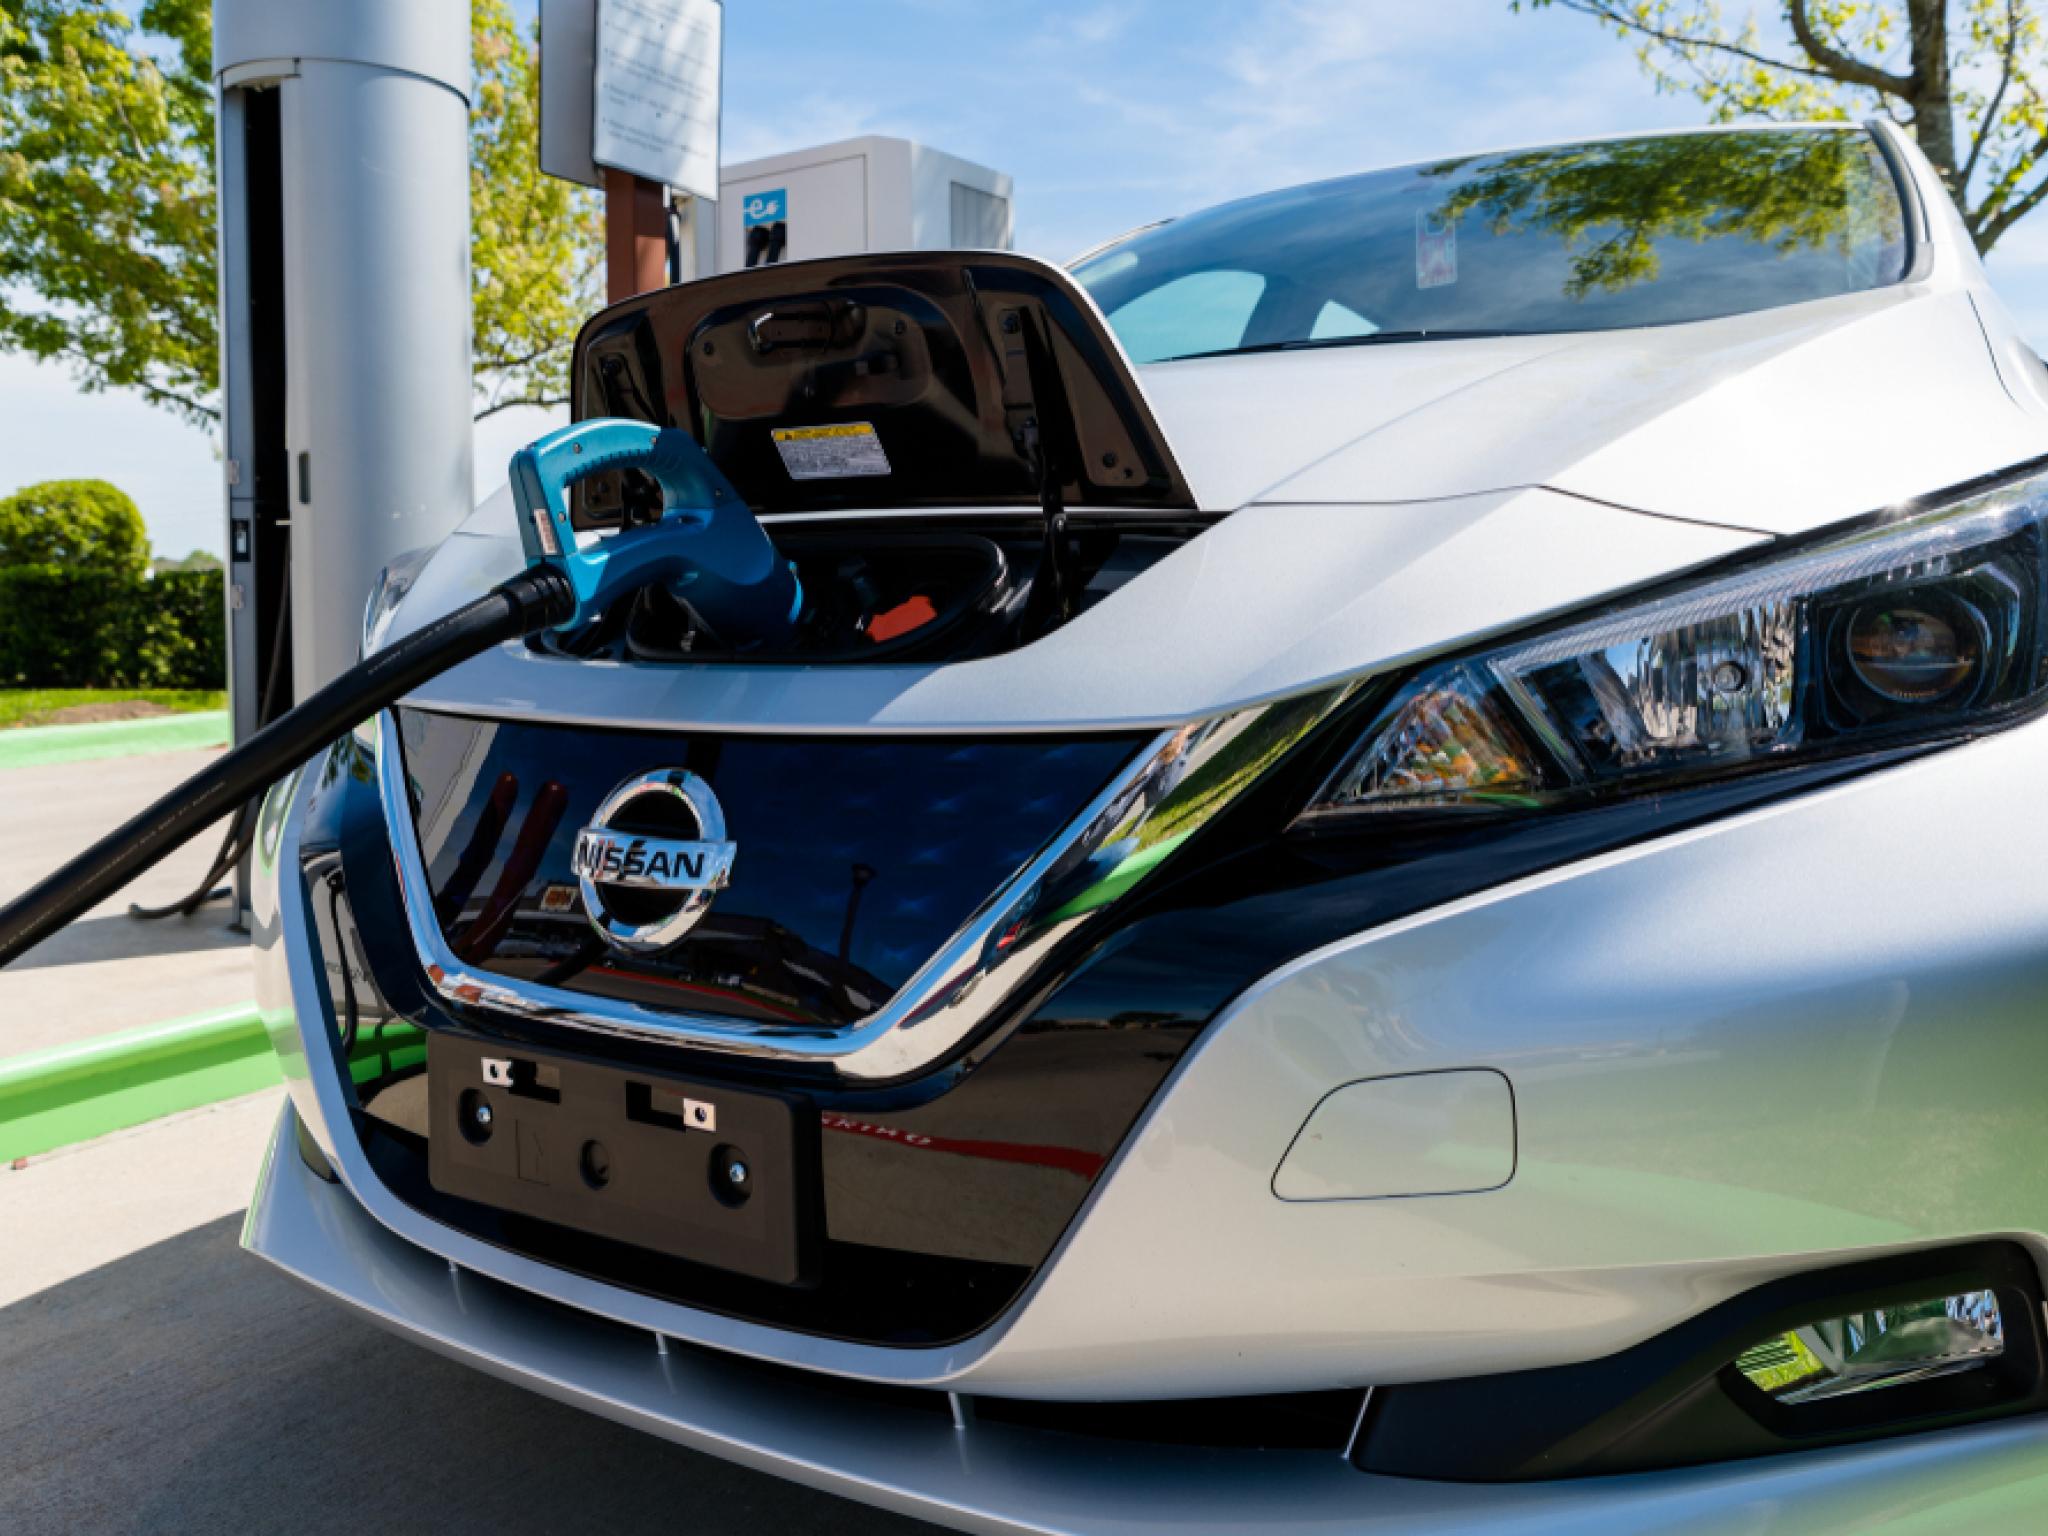  nissan-and-honda-play-tesla-catchup--considering-ev-charging-tie-up-to-boost-competitiveness 